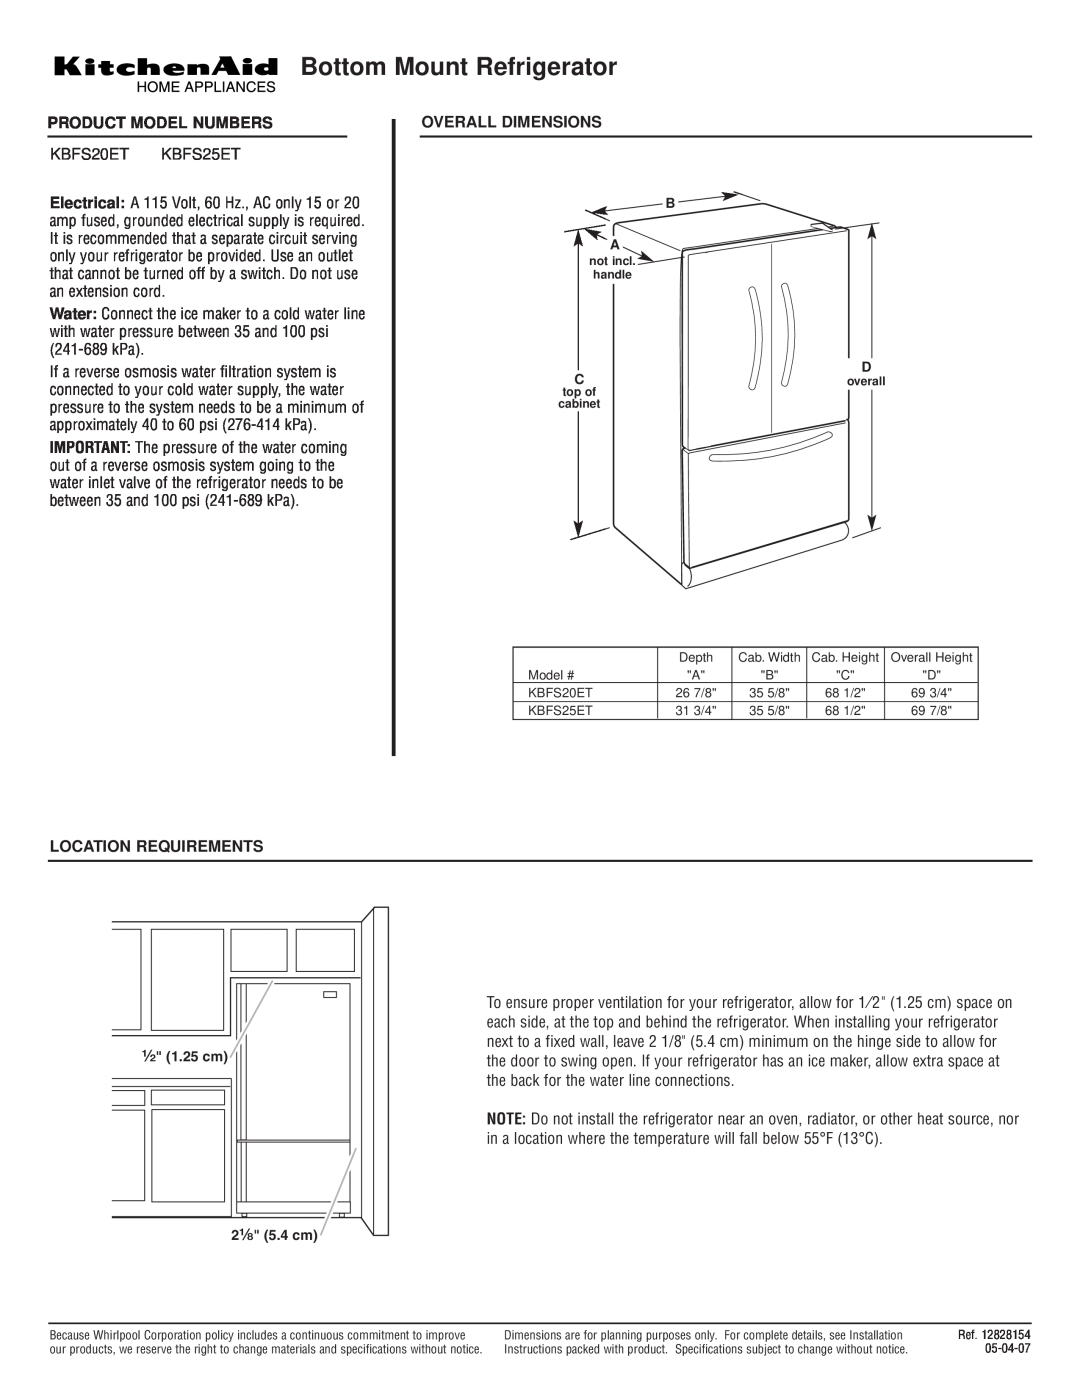 KitchenAid KBFS20ET dimensions Bottom Mount Refrigerator, Product Model Numbers, Overall Dimensions, Location Requirements 